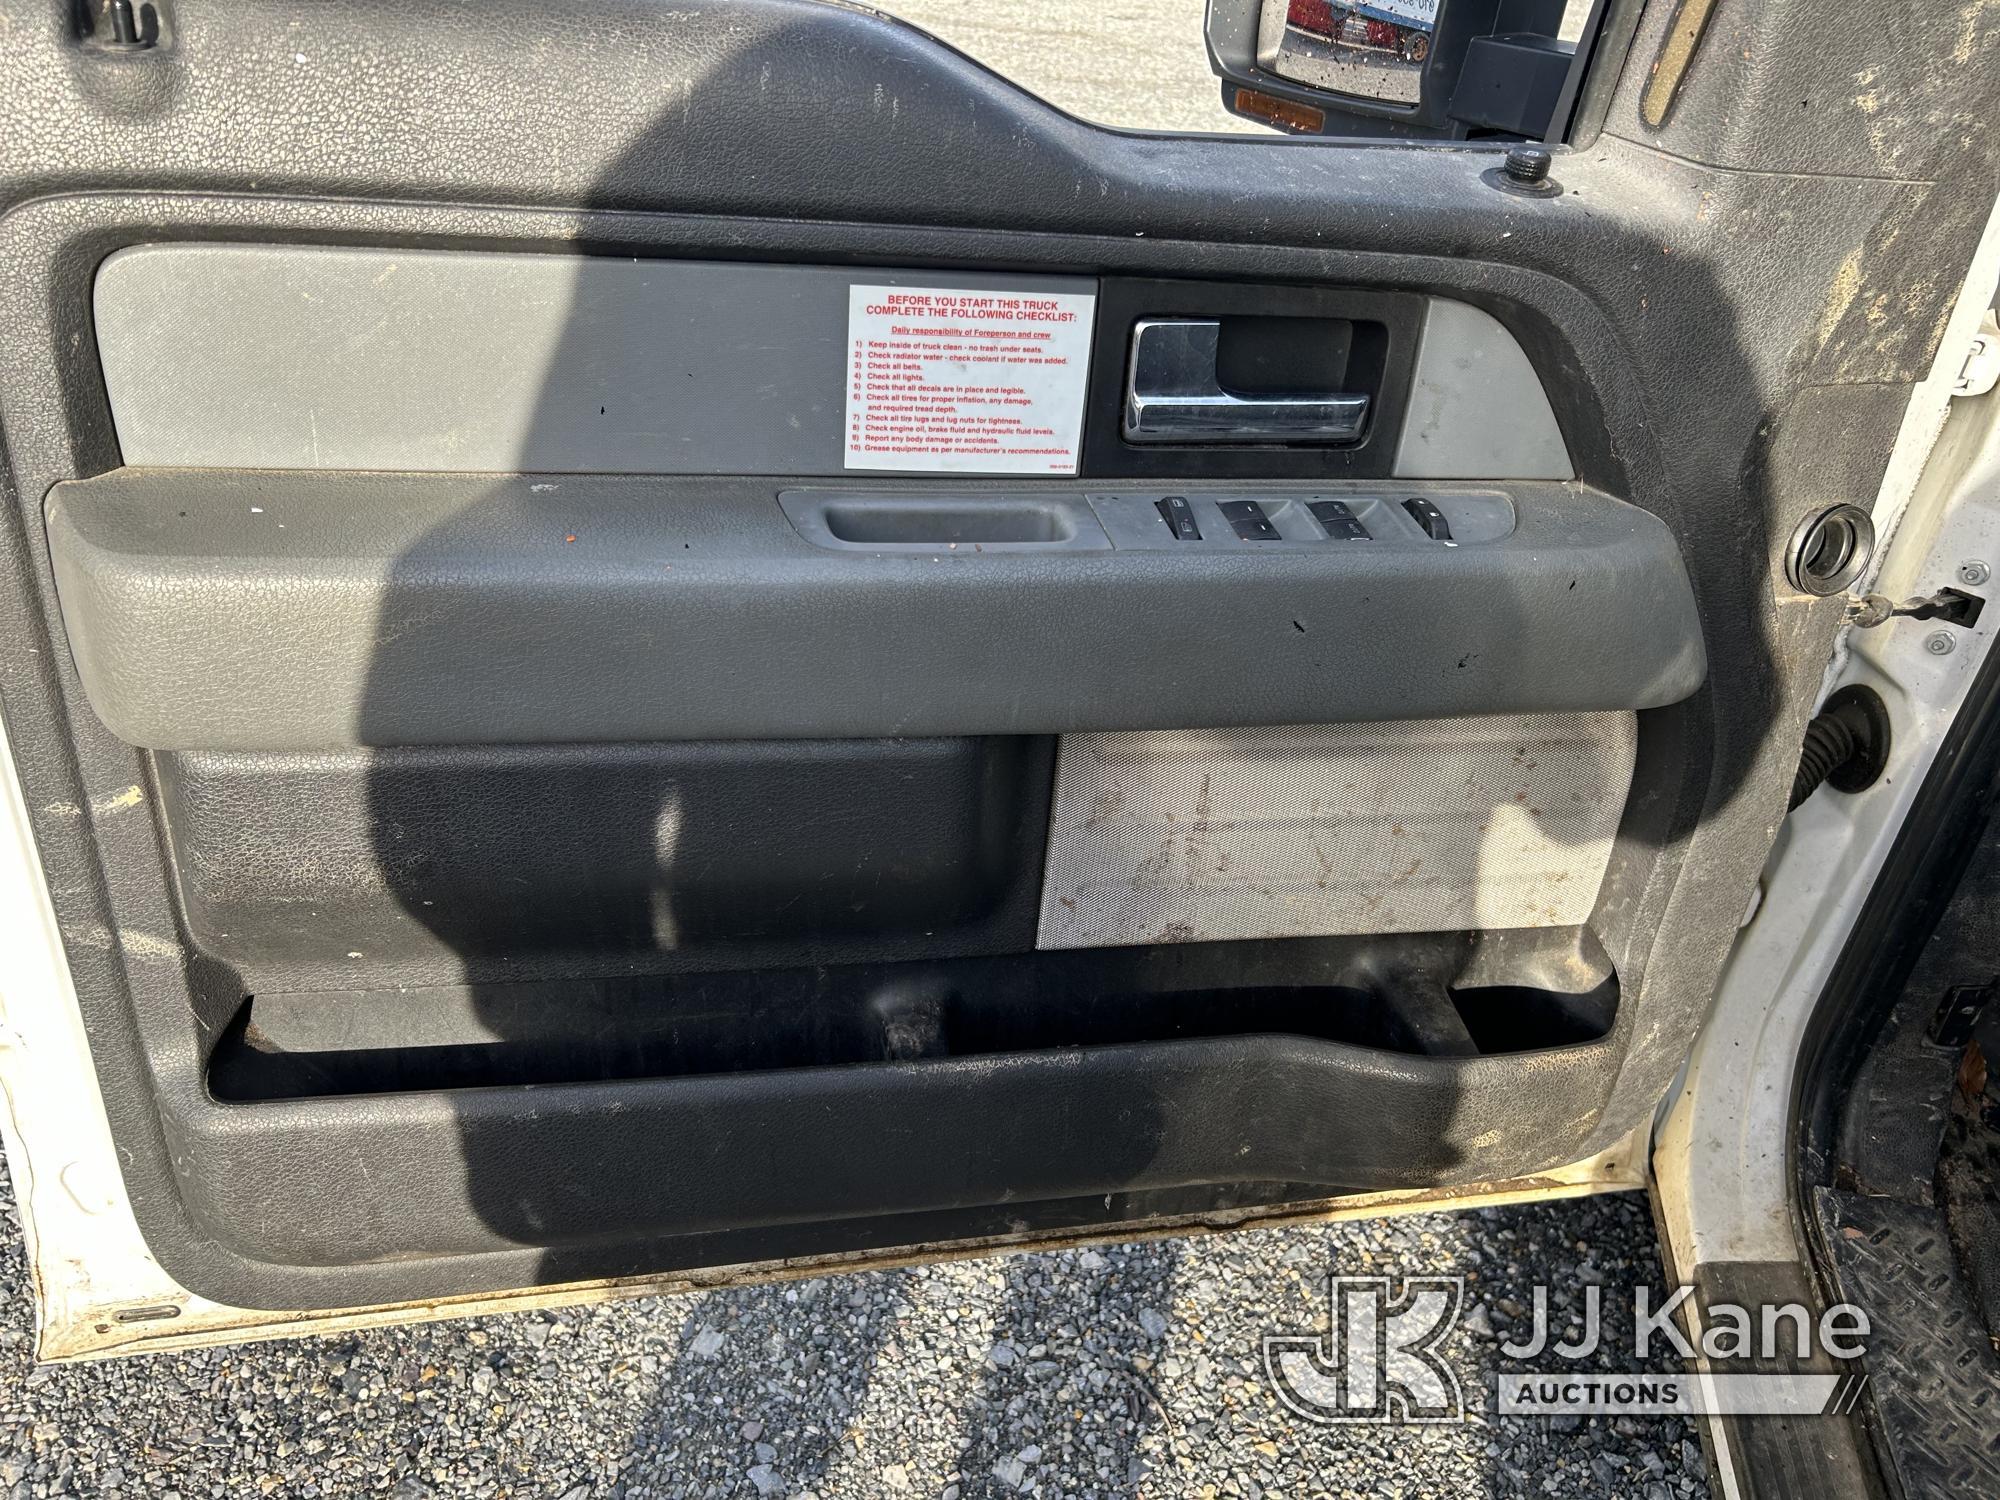 (Hagerstown, MD) 2014 Ford F150 4x4 Extended-Cab Pickup Truck Not Running, Missing Battery, Conditio